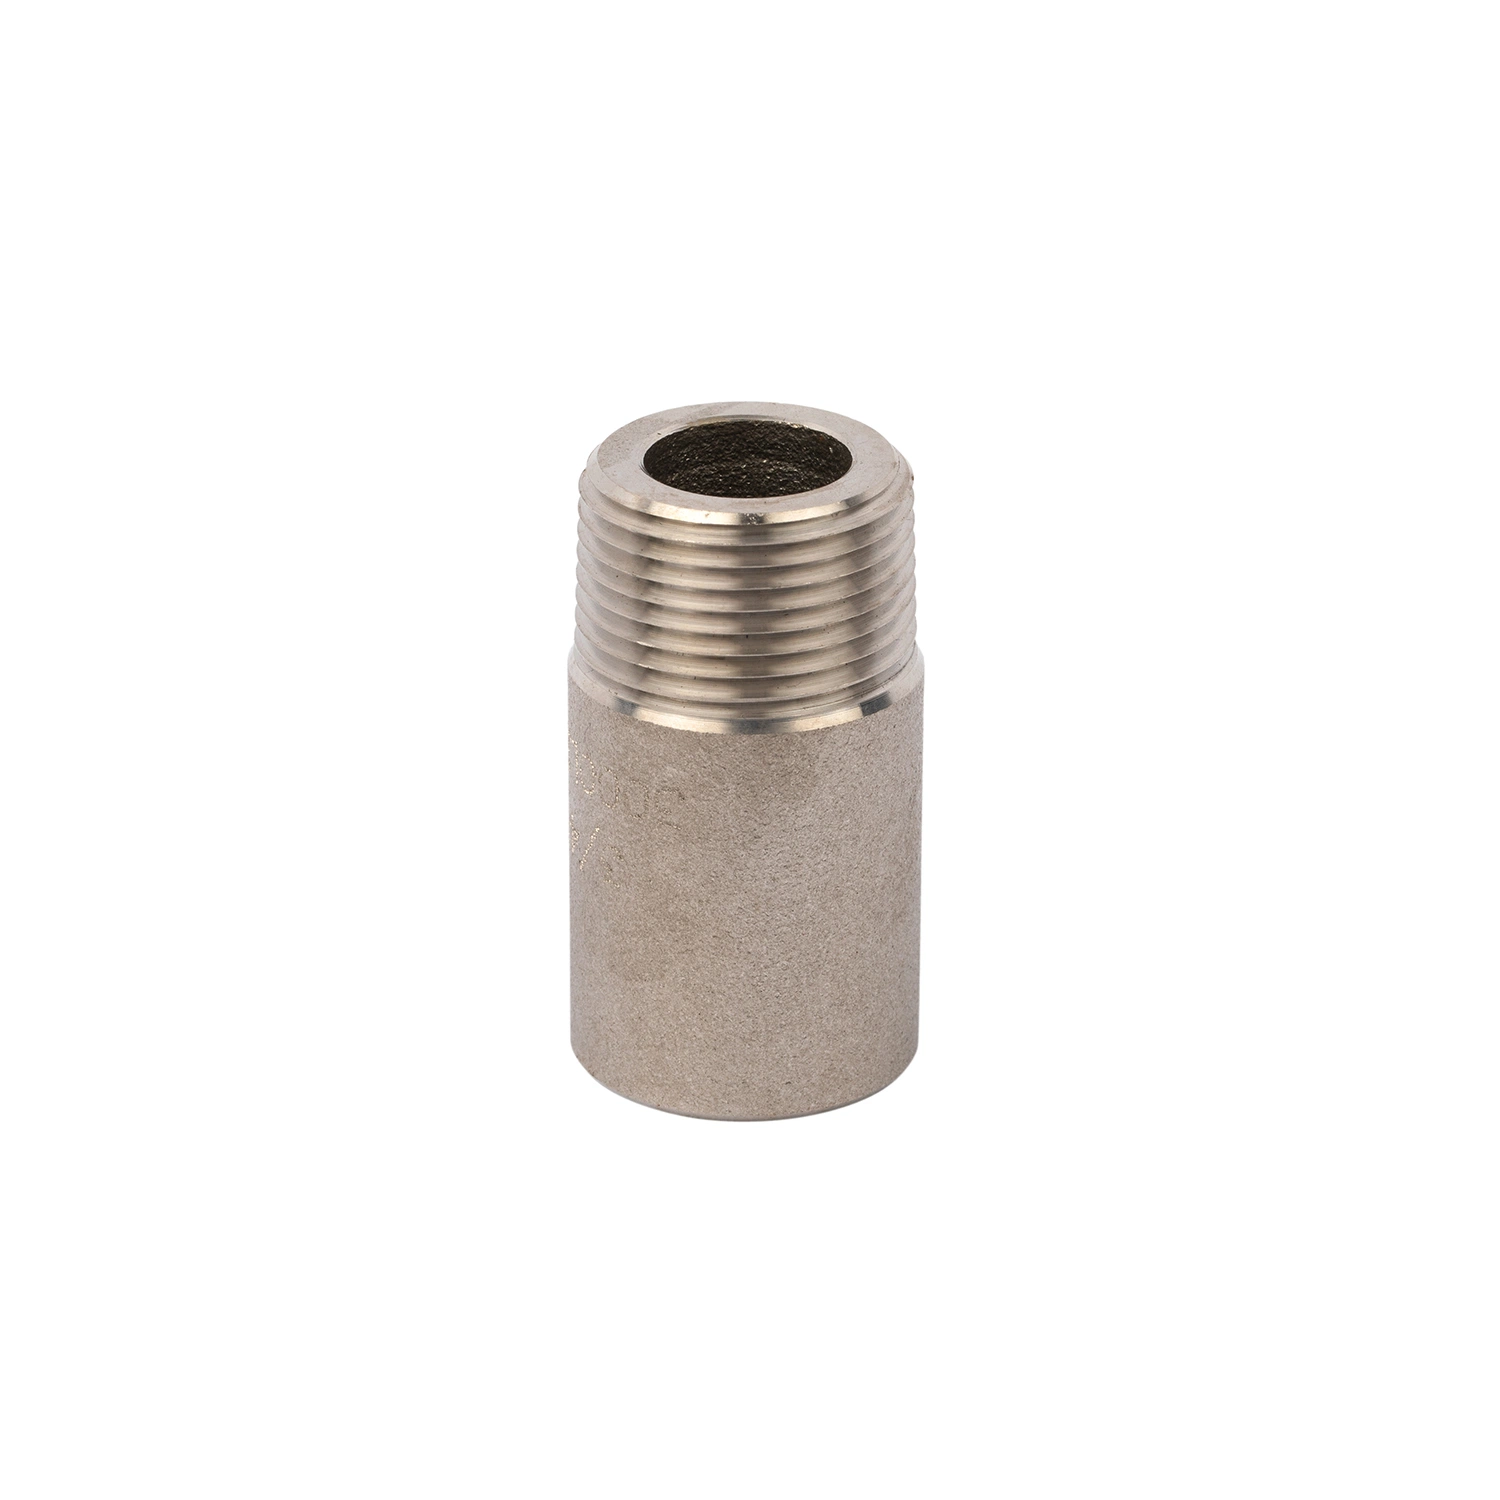 DN20-50 A105 304 316 NPT Hex/Hexagonal Threaded/Thread Forged BS 3799 Reducing Stainless Steel Nipple